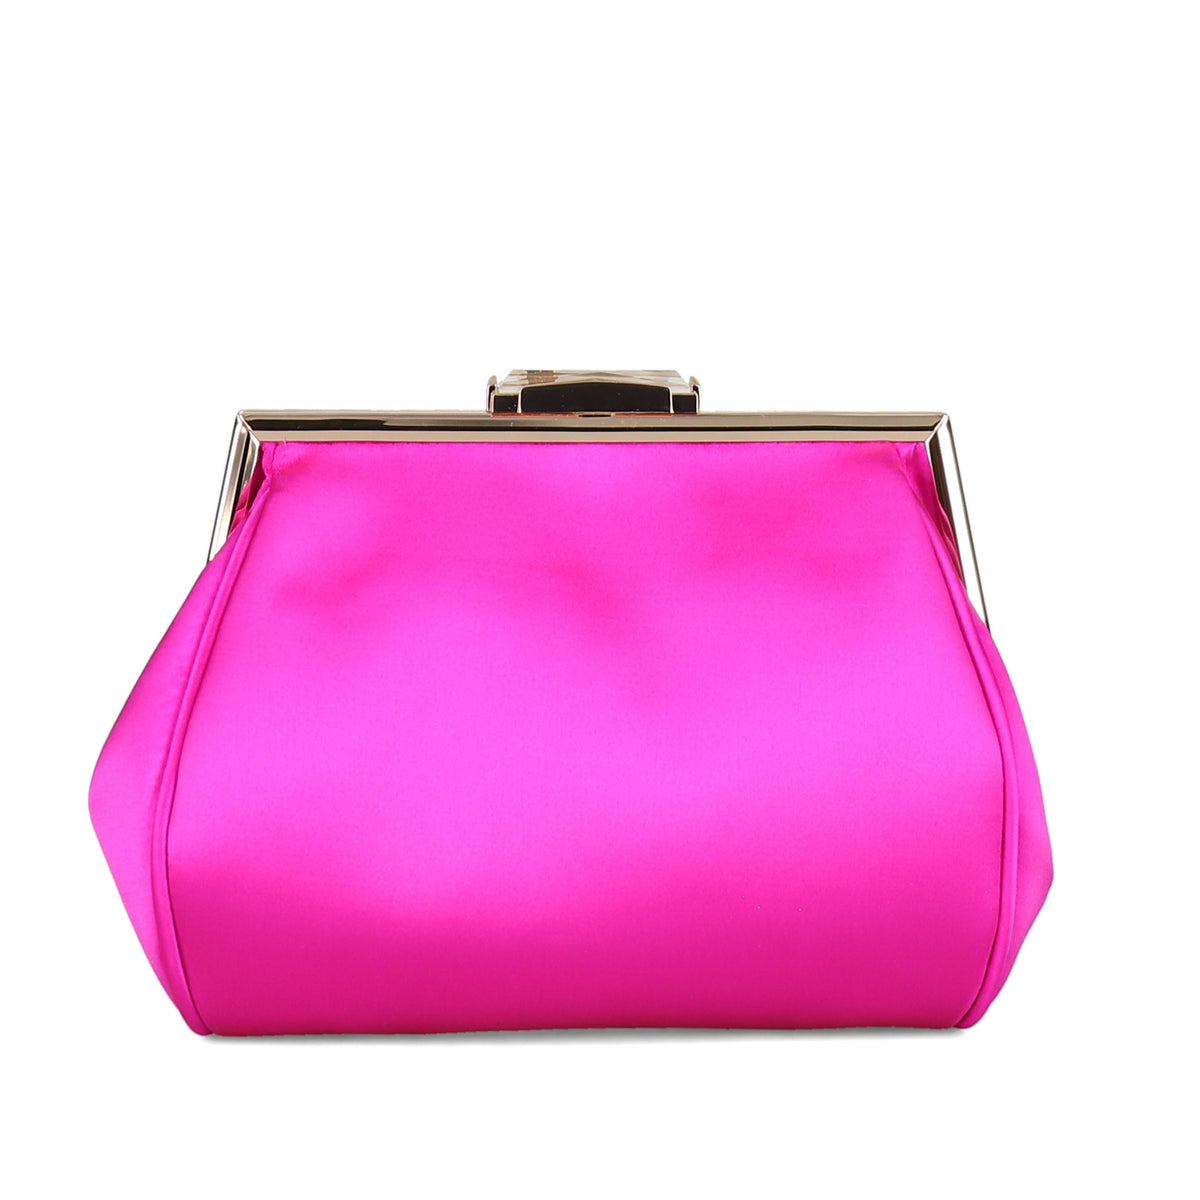 Jewel Structured Pouch With Beveled Frame Closure